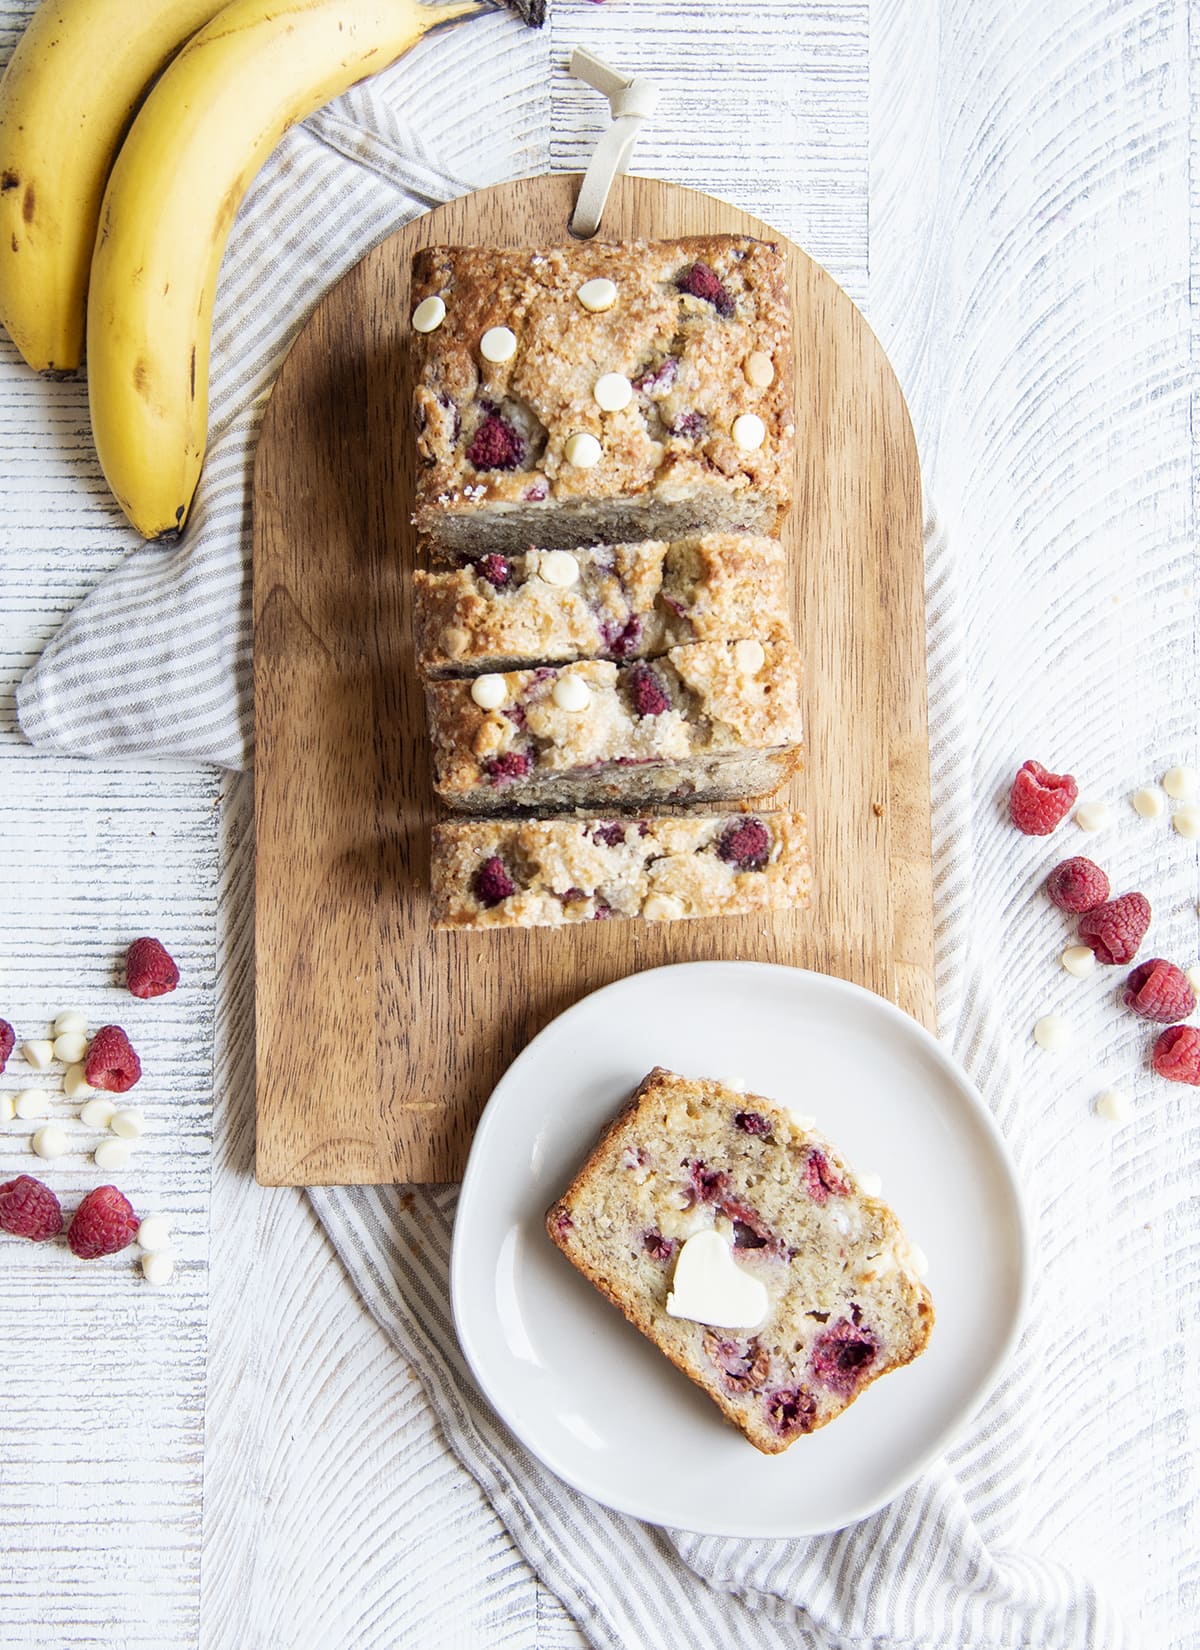 A slice of raspberry white chocolate banana bread on a plate, next to the loaf of it.